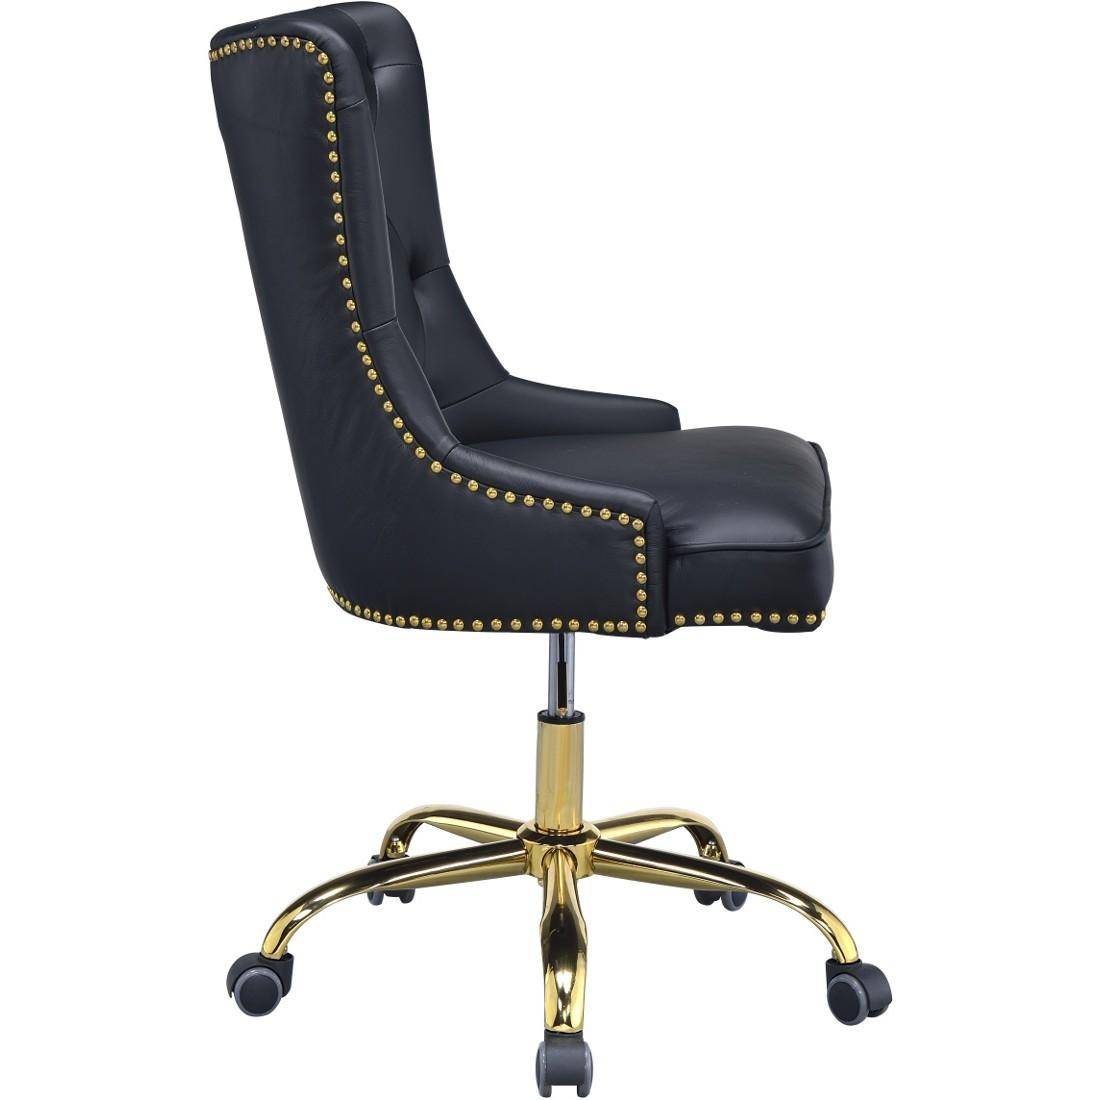 Buy Acme Purlie Office Chair In Black Chrome Pu Online